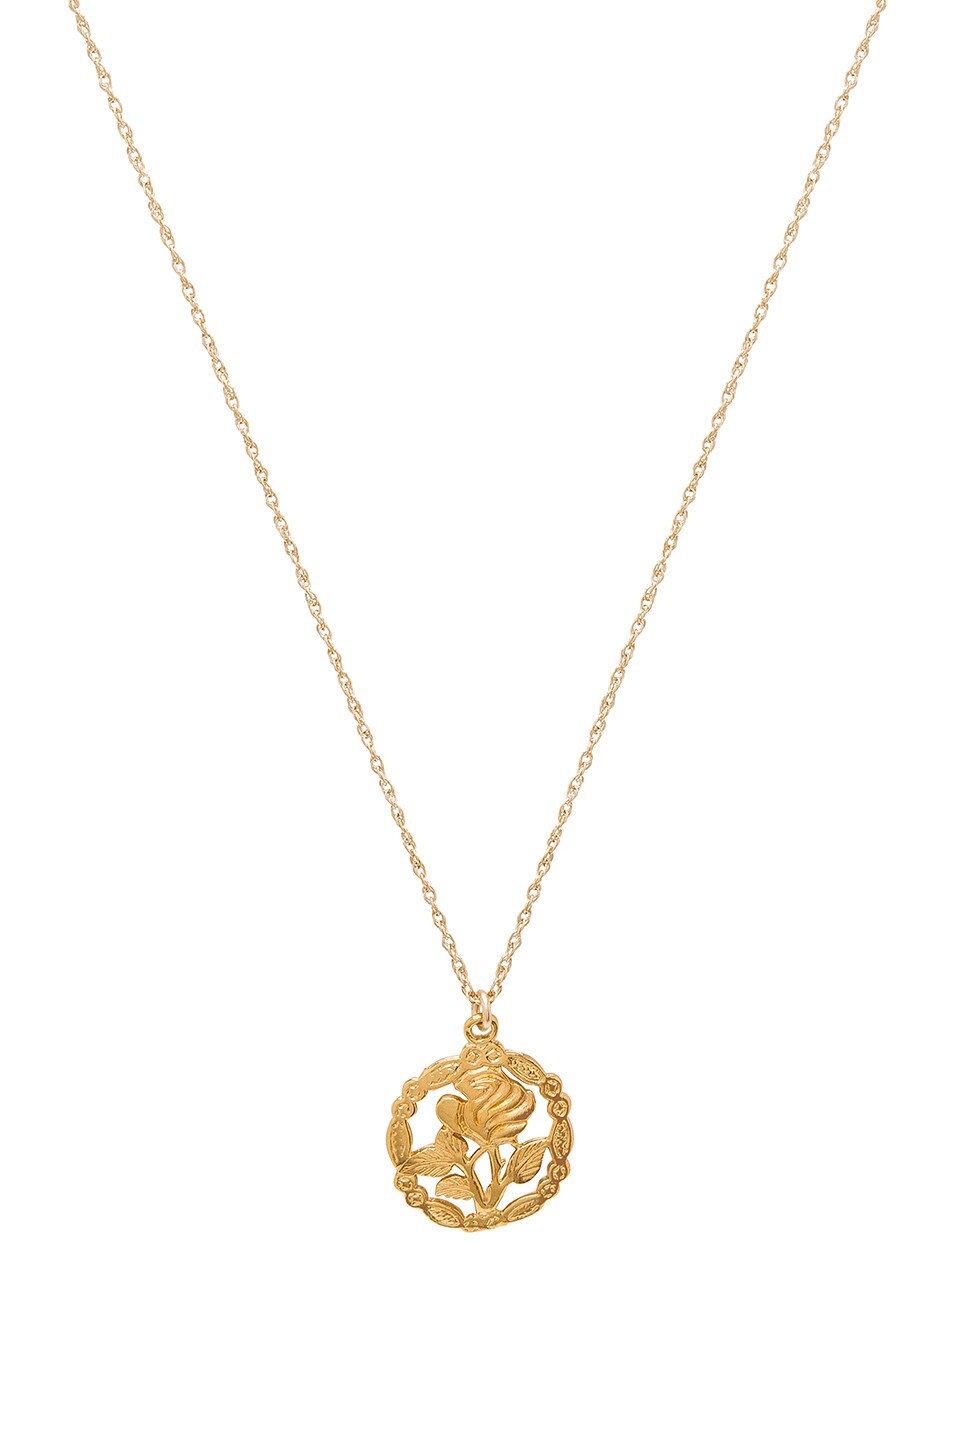 NATALIE B JEWELRY ROSE NECKLACE